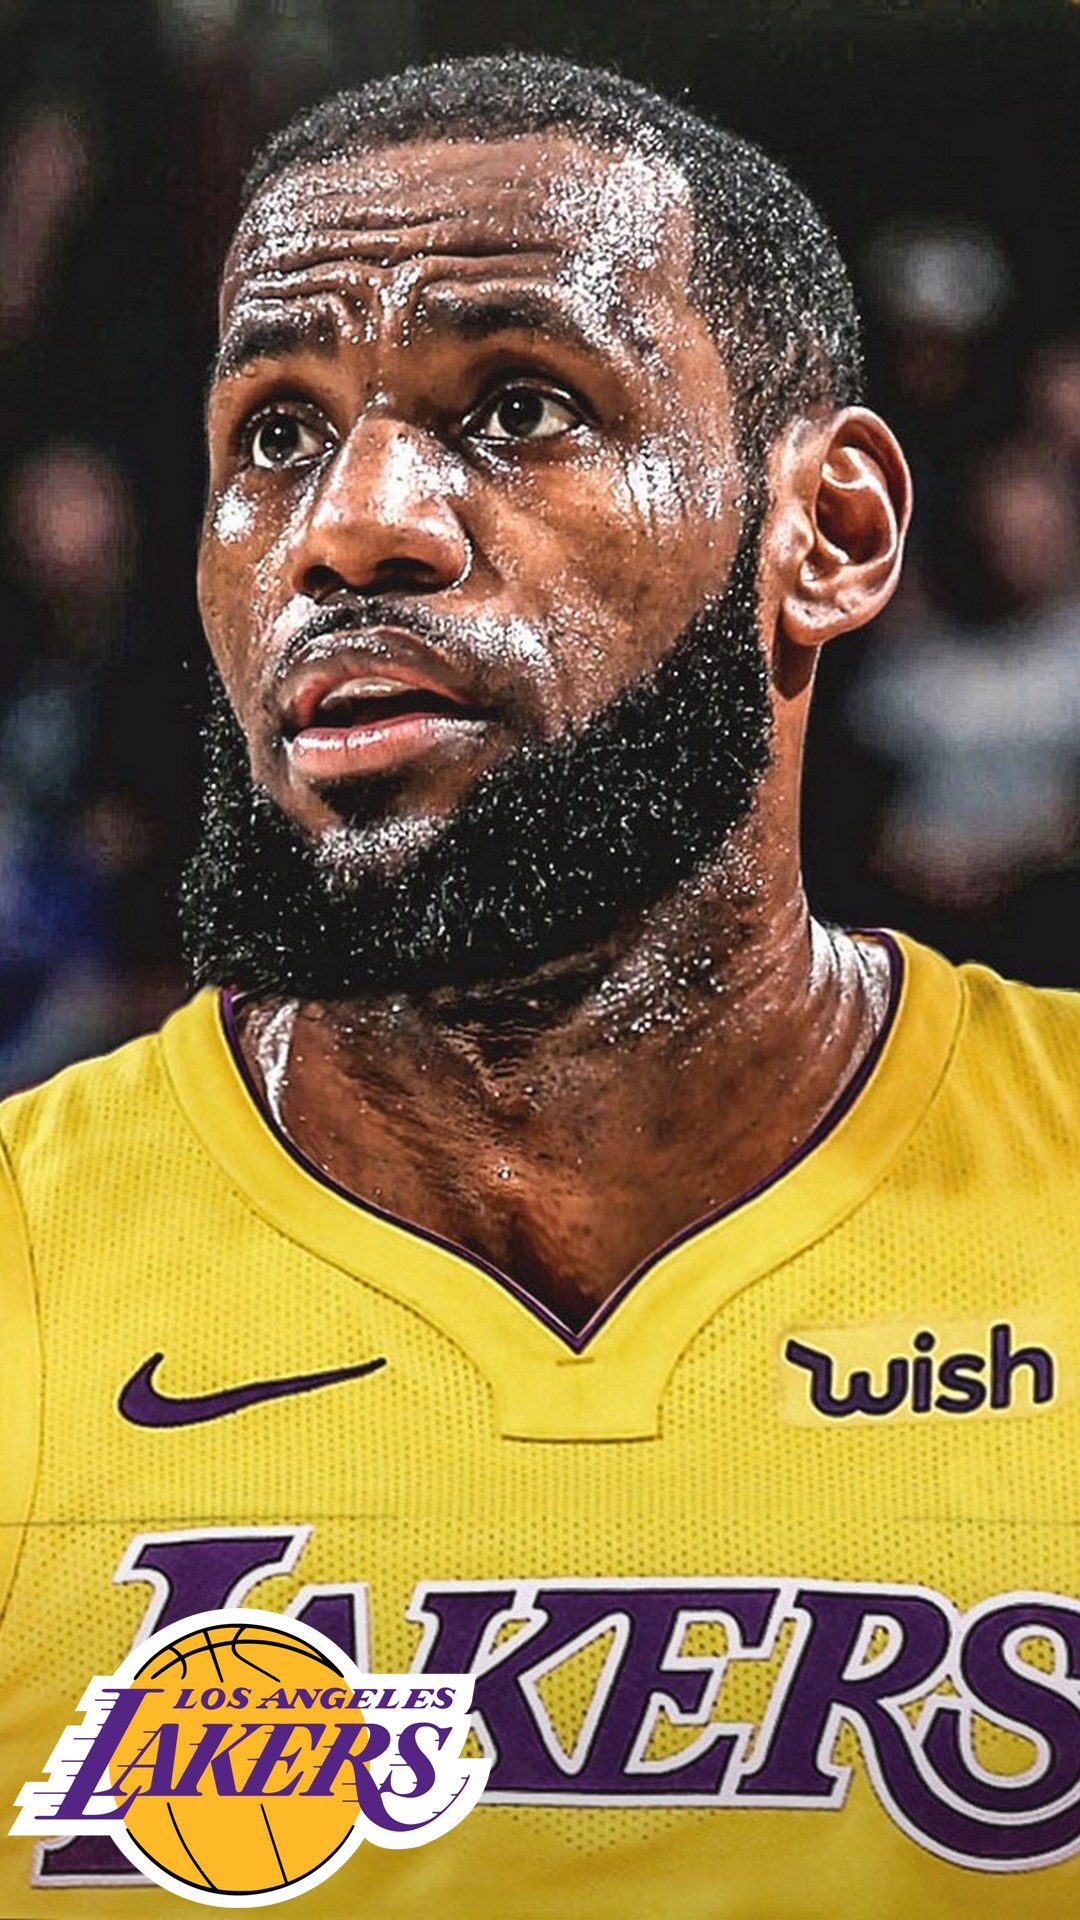 LA Lakers LeBron James iPhone 7 Plus Wallpaper with image dimensions 1080x1920 pixel. You can make this wallpaper for your Desktop Computer Backgrounds, Windows or Mac Screensavers, iPhone Lock screen, Tablet or Android and another Mobile Phone device